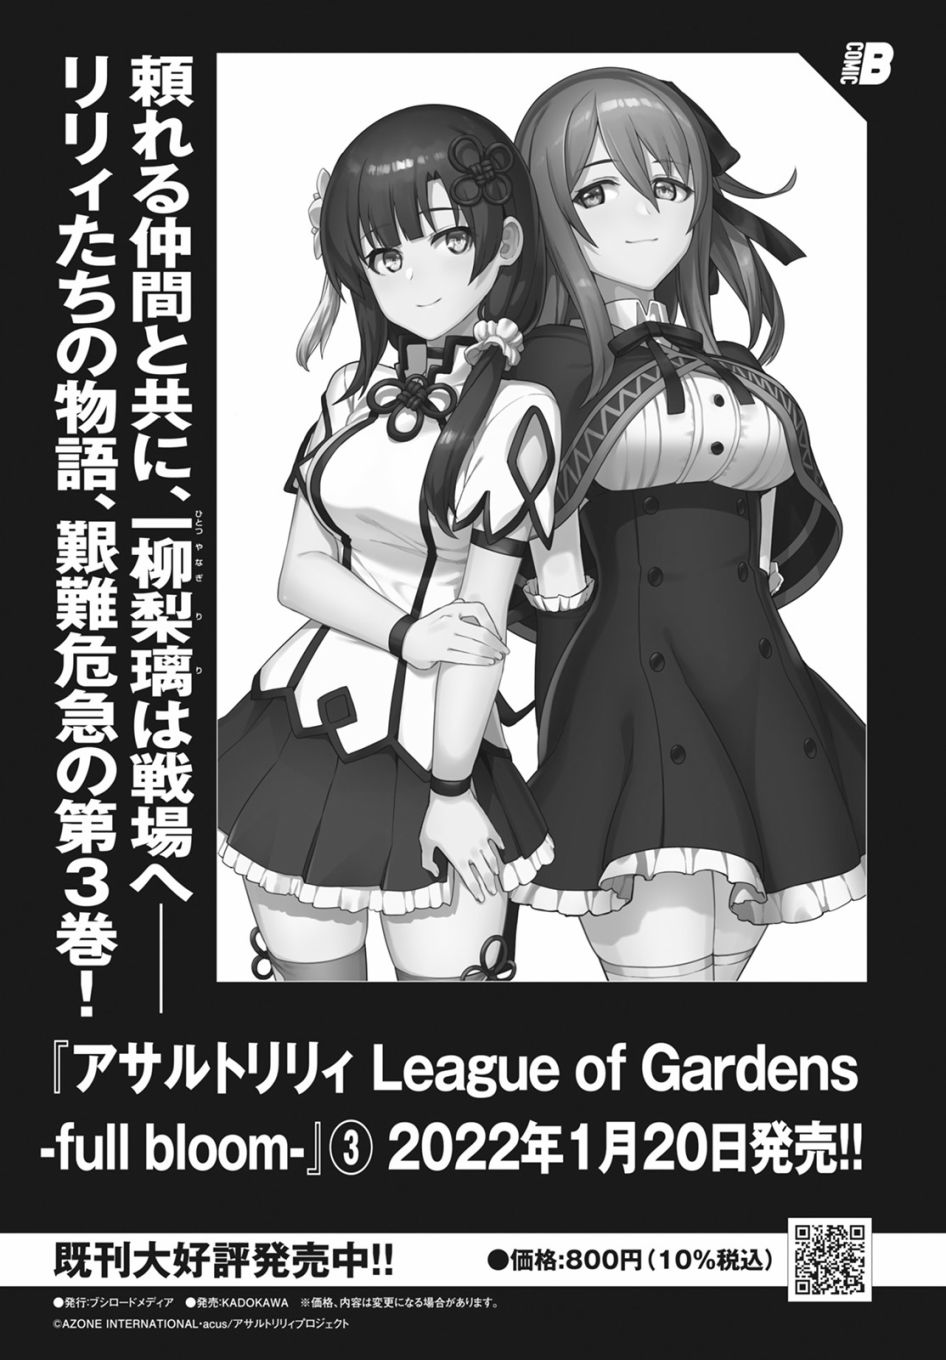 Assault LILY League of Gardens -full bloom- - 第17话 - 3